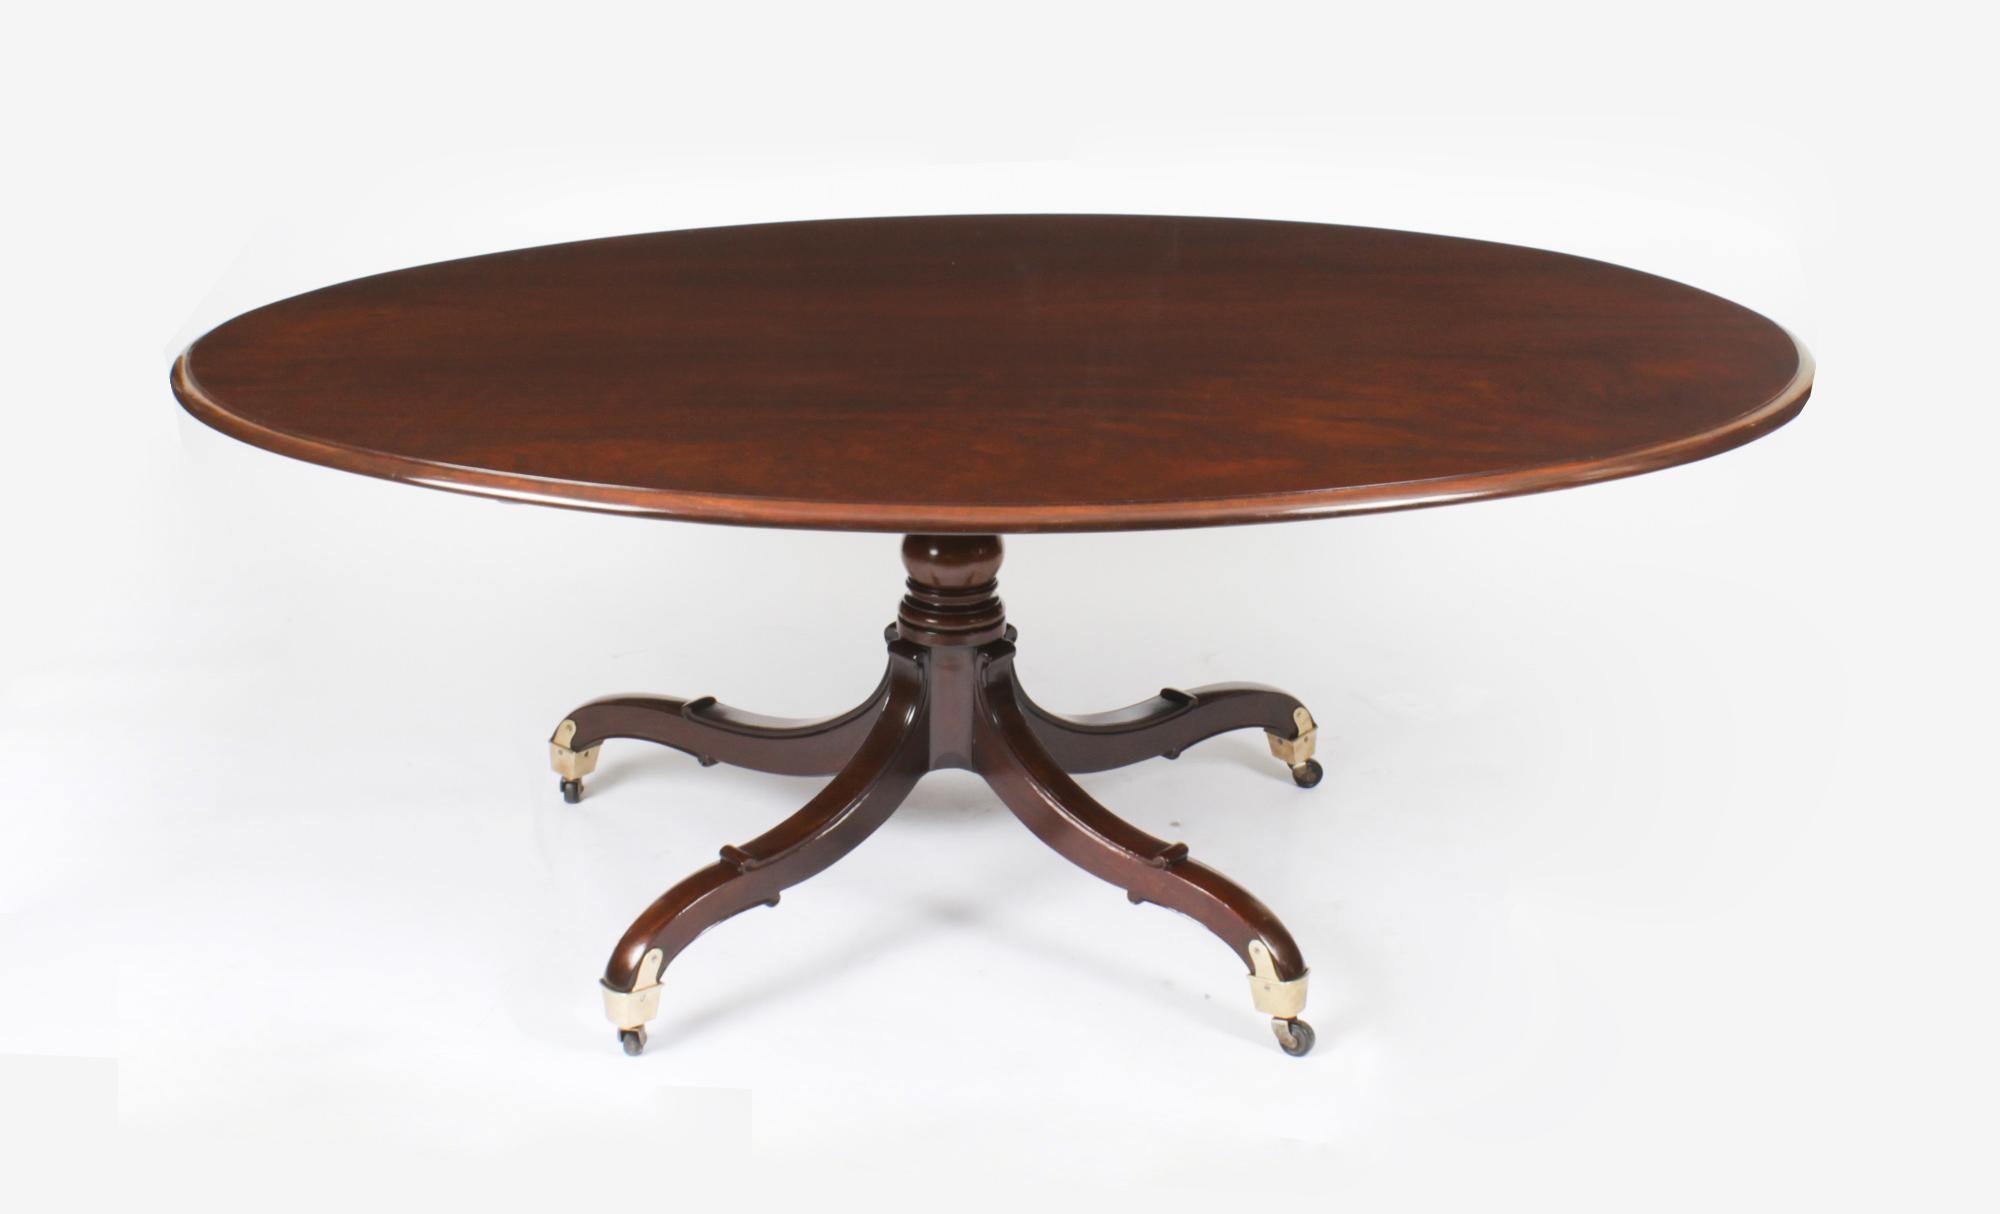 This is a superb large Irish Georgian mahogany Loo / Breakfast table, circa 1830 in date with a set of six vintage dining chairs.
 
The Botanical name for the mahogany that this dining set is made of is Swietenia Macrophylla and this type of